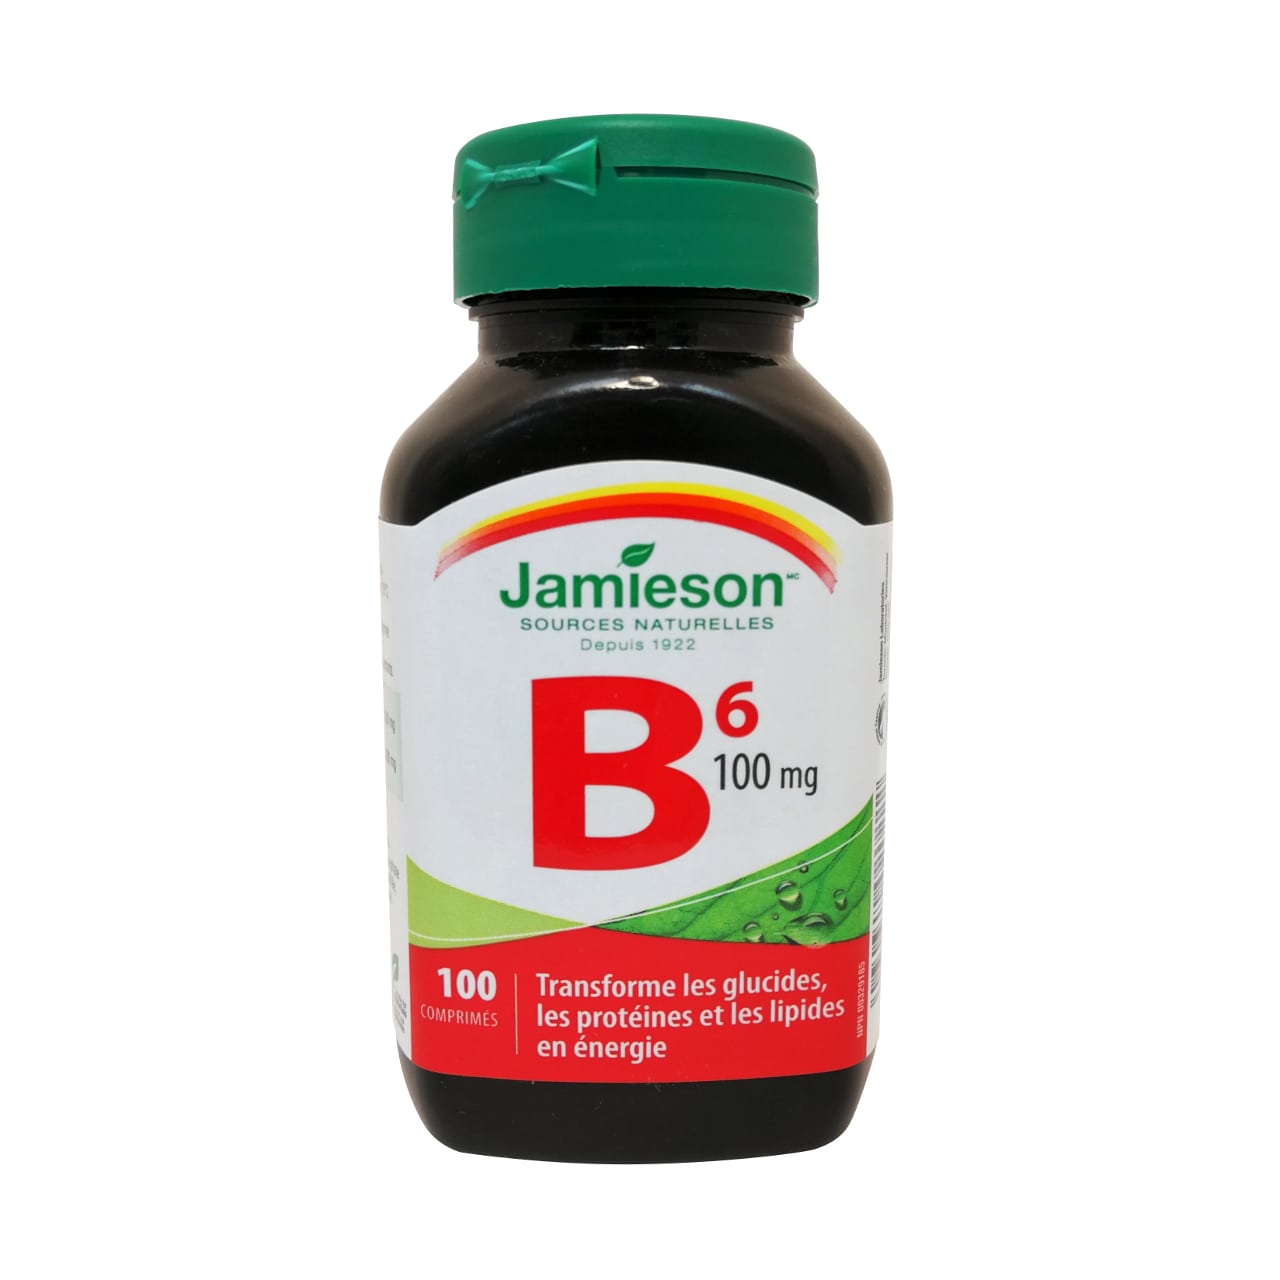 Product label for Jamieson B6 100mg in French